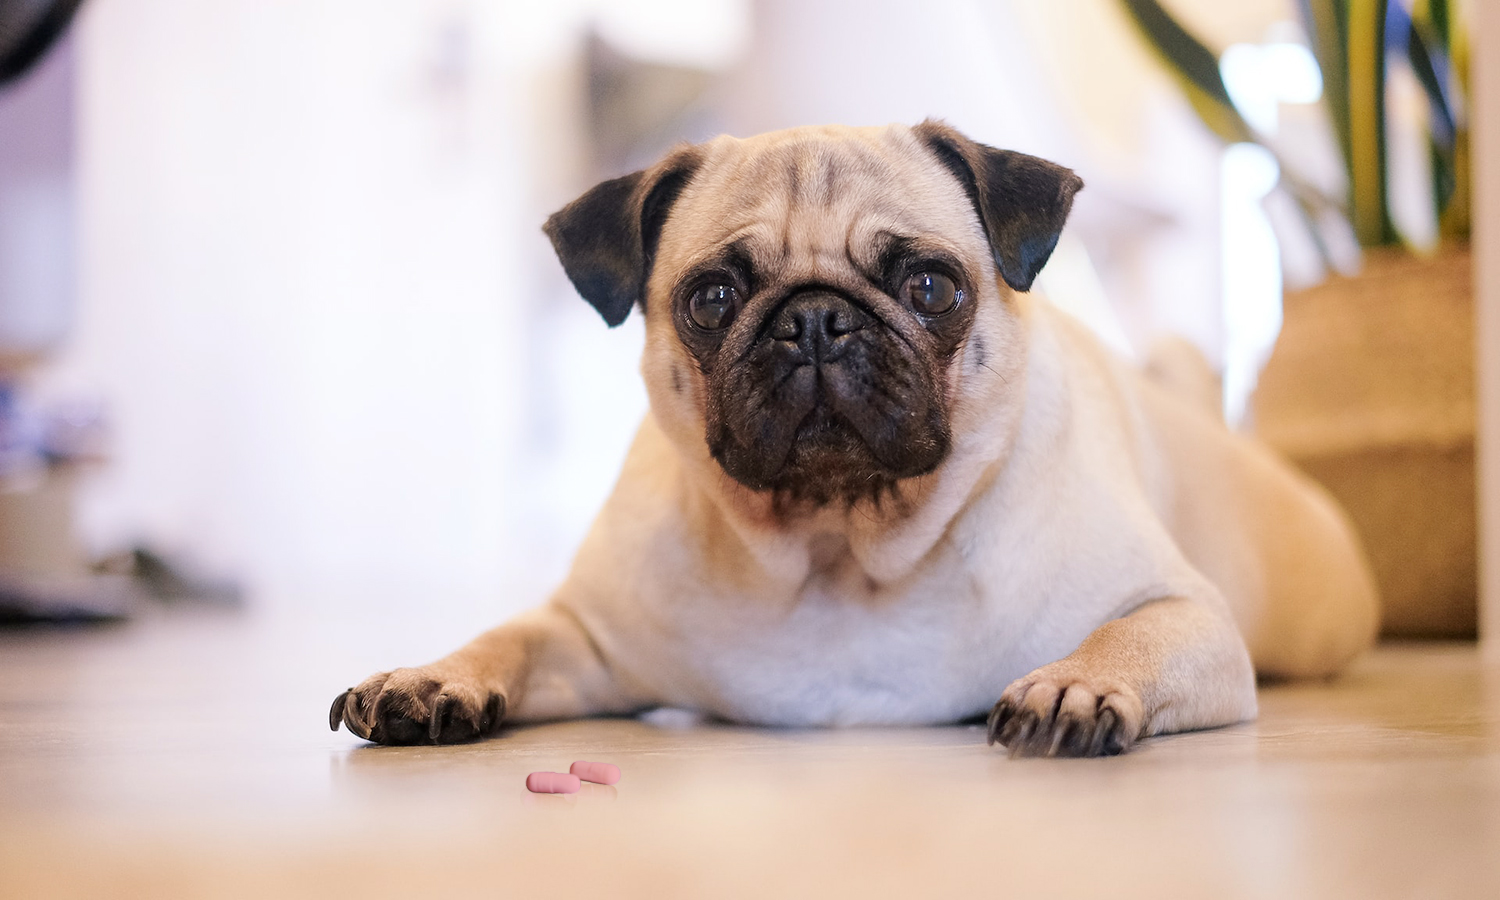 Is Benadryl safe for dogs and what are the risks